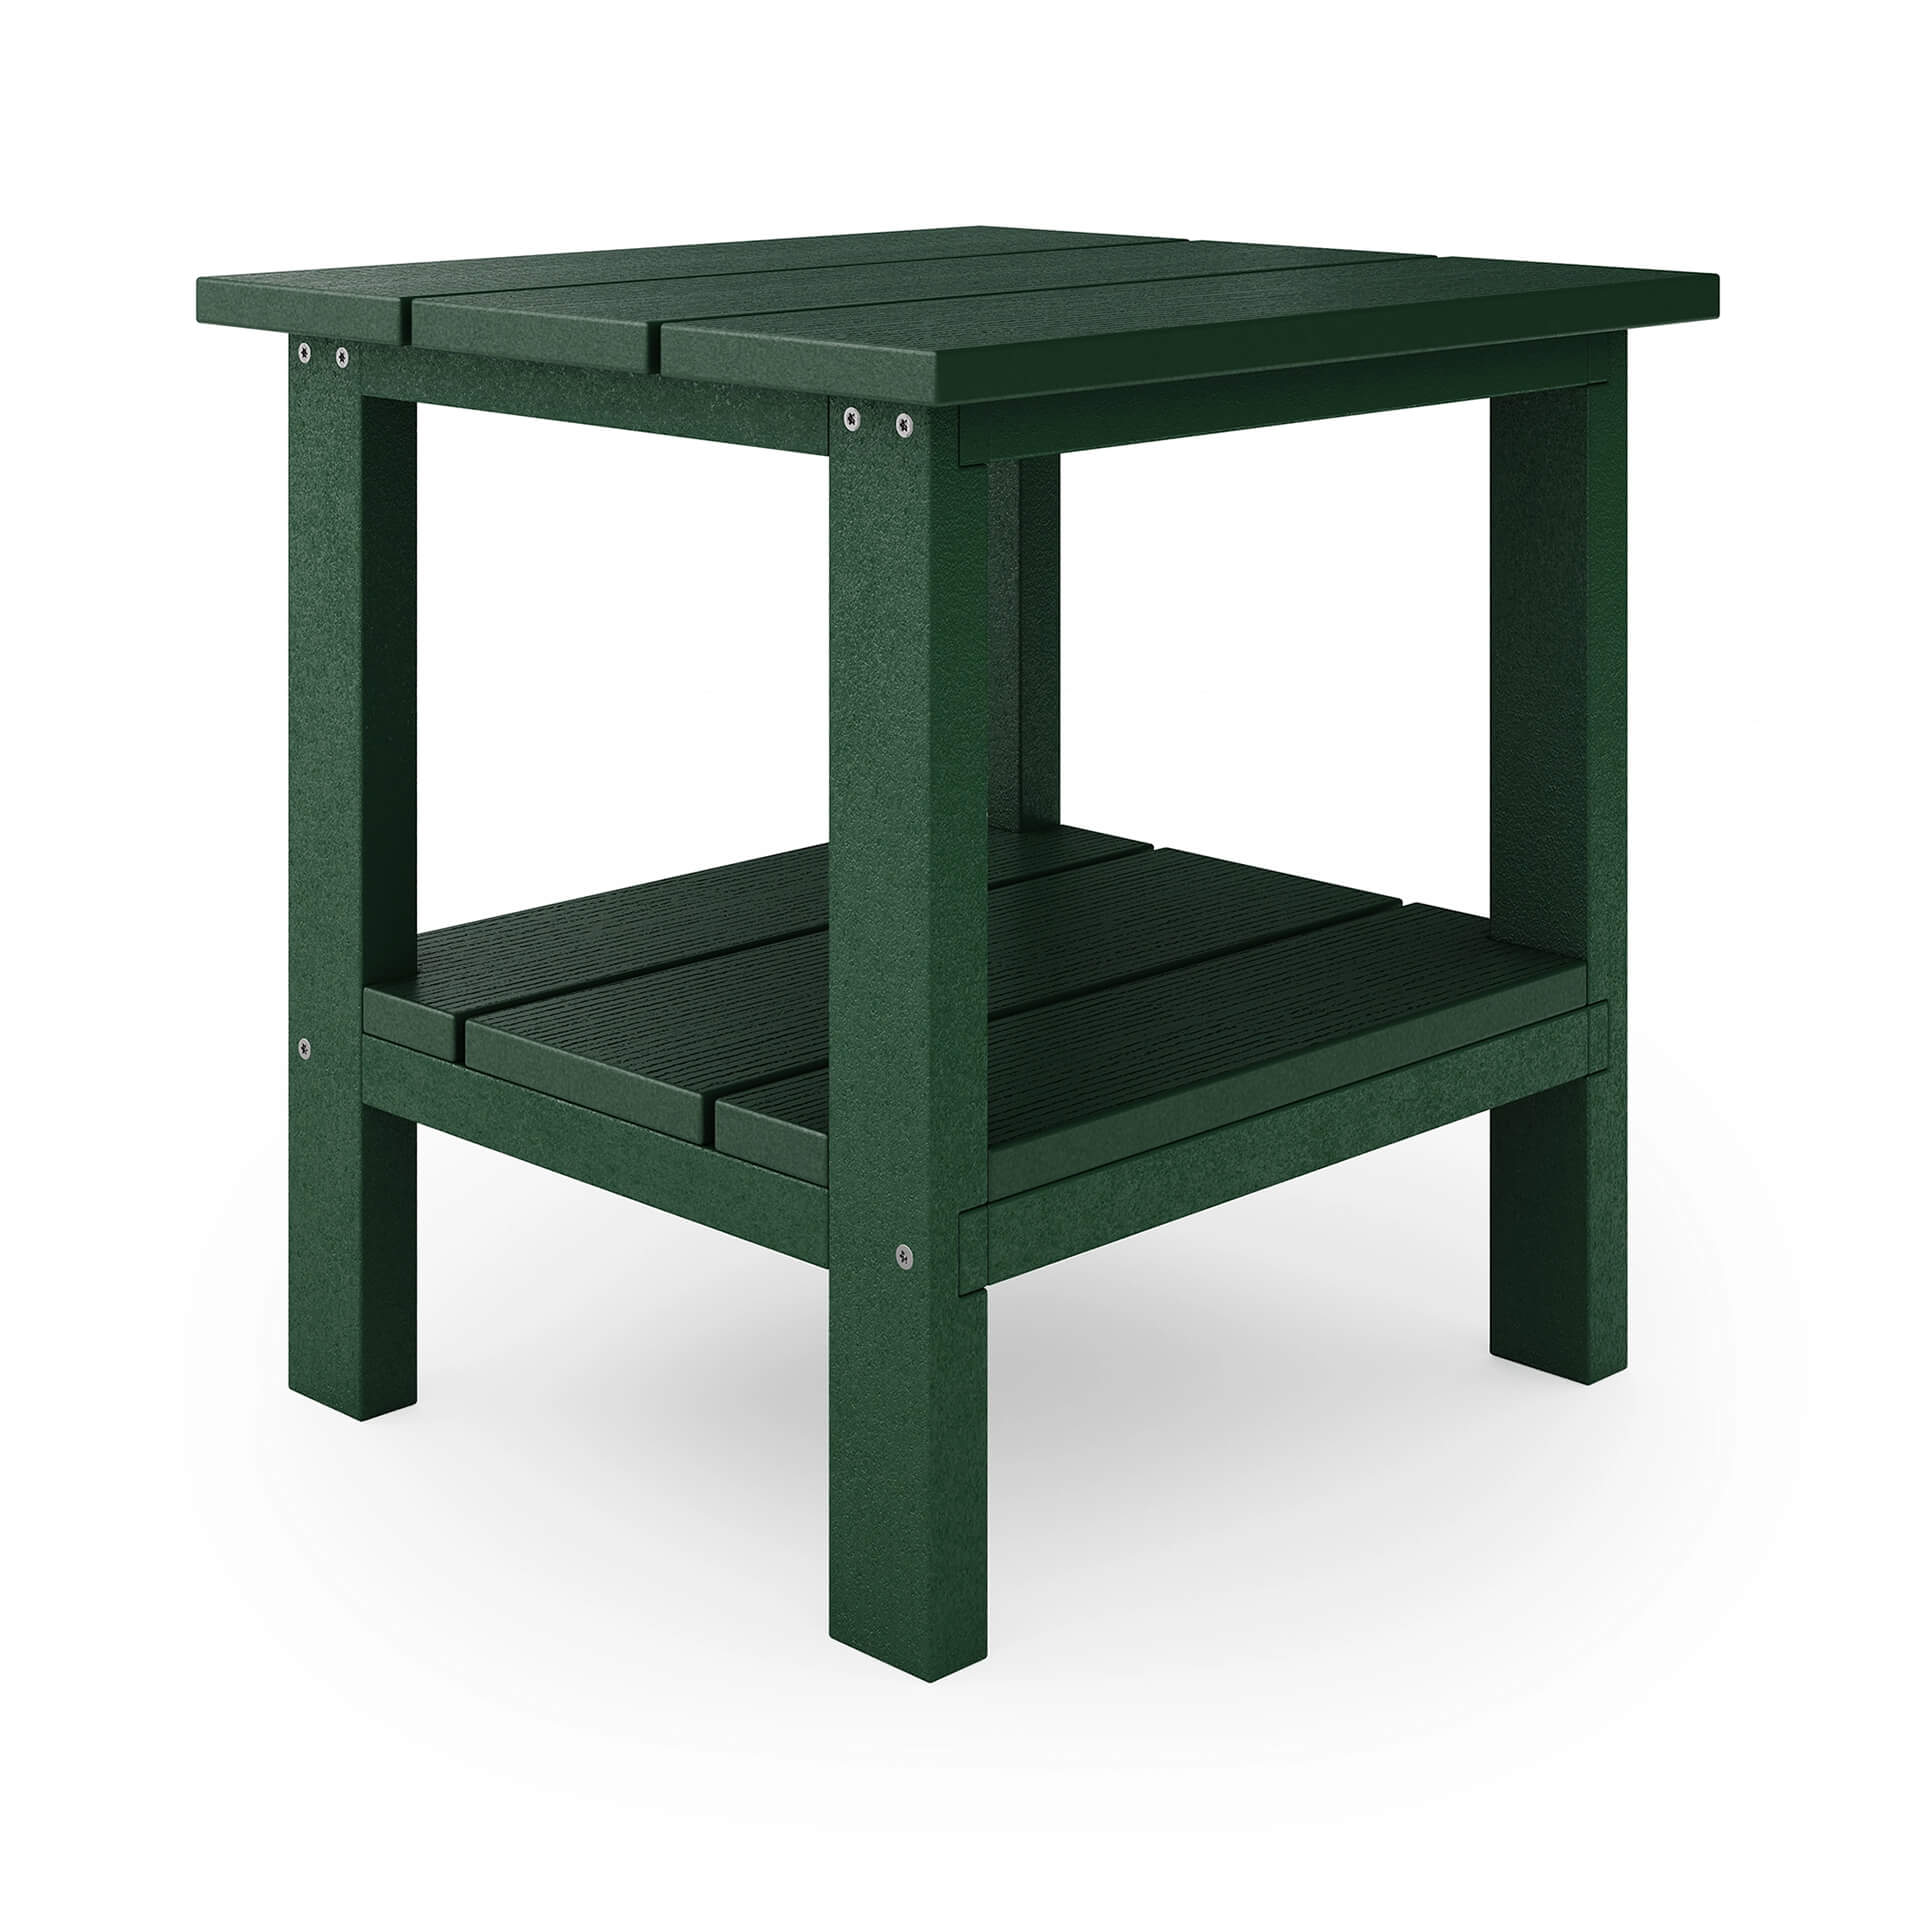 Silo 3D Visualization of Green Outdoor Table